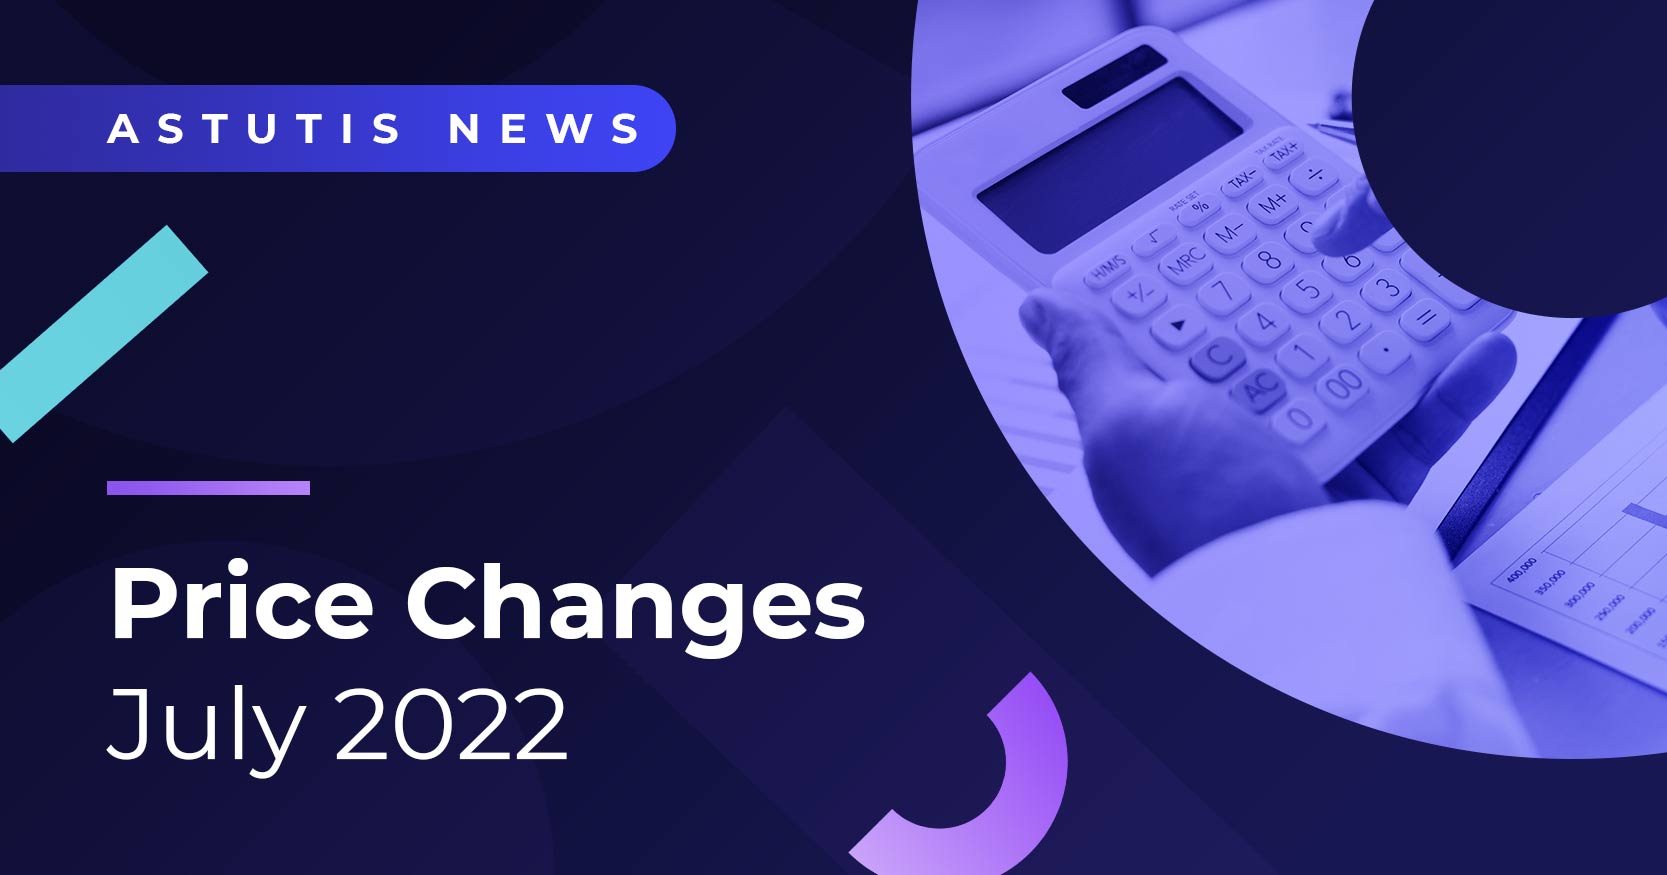 Price Changes July 2022 Image